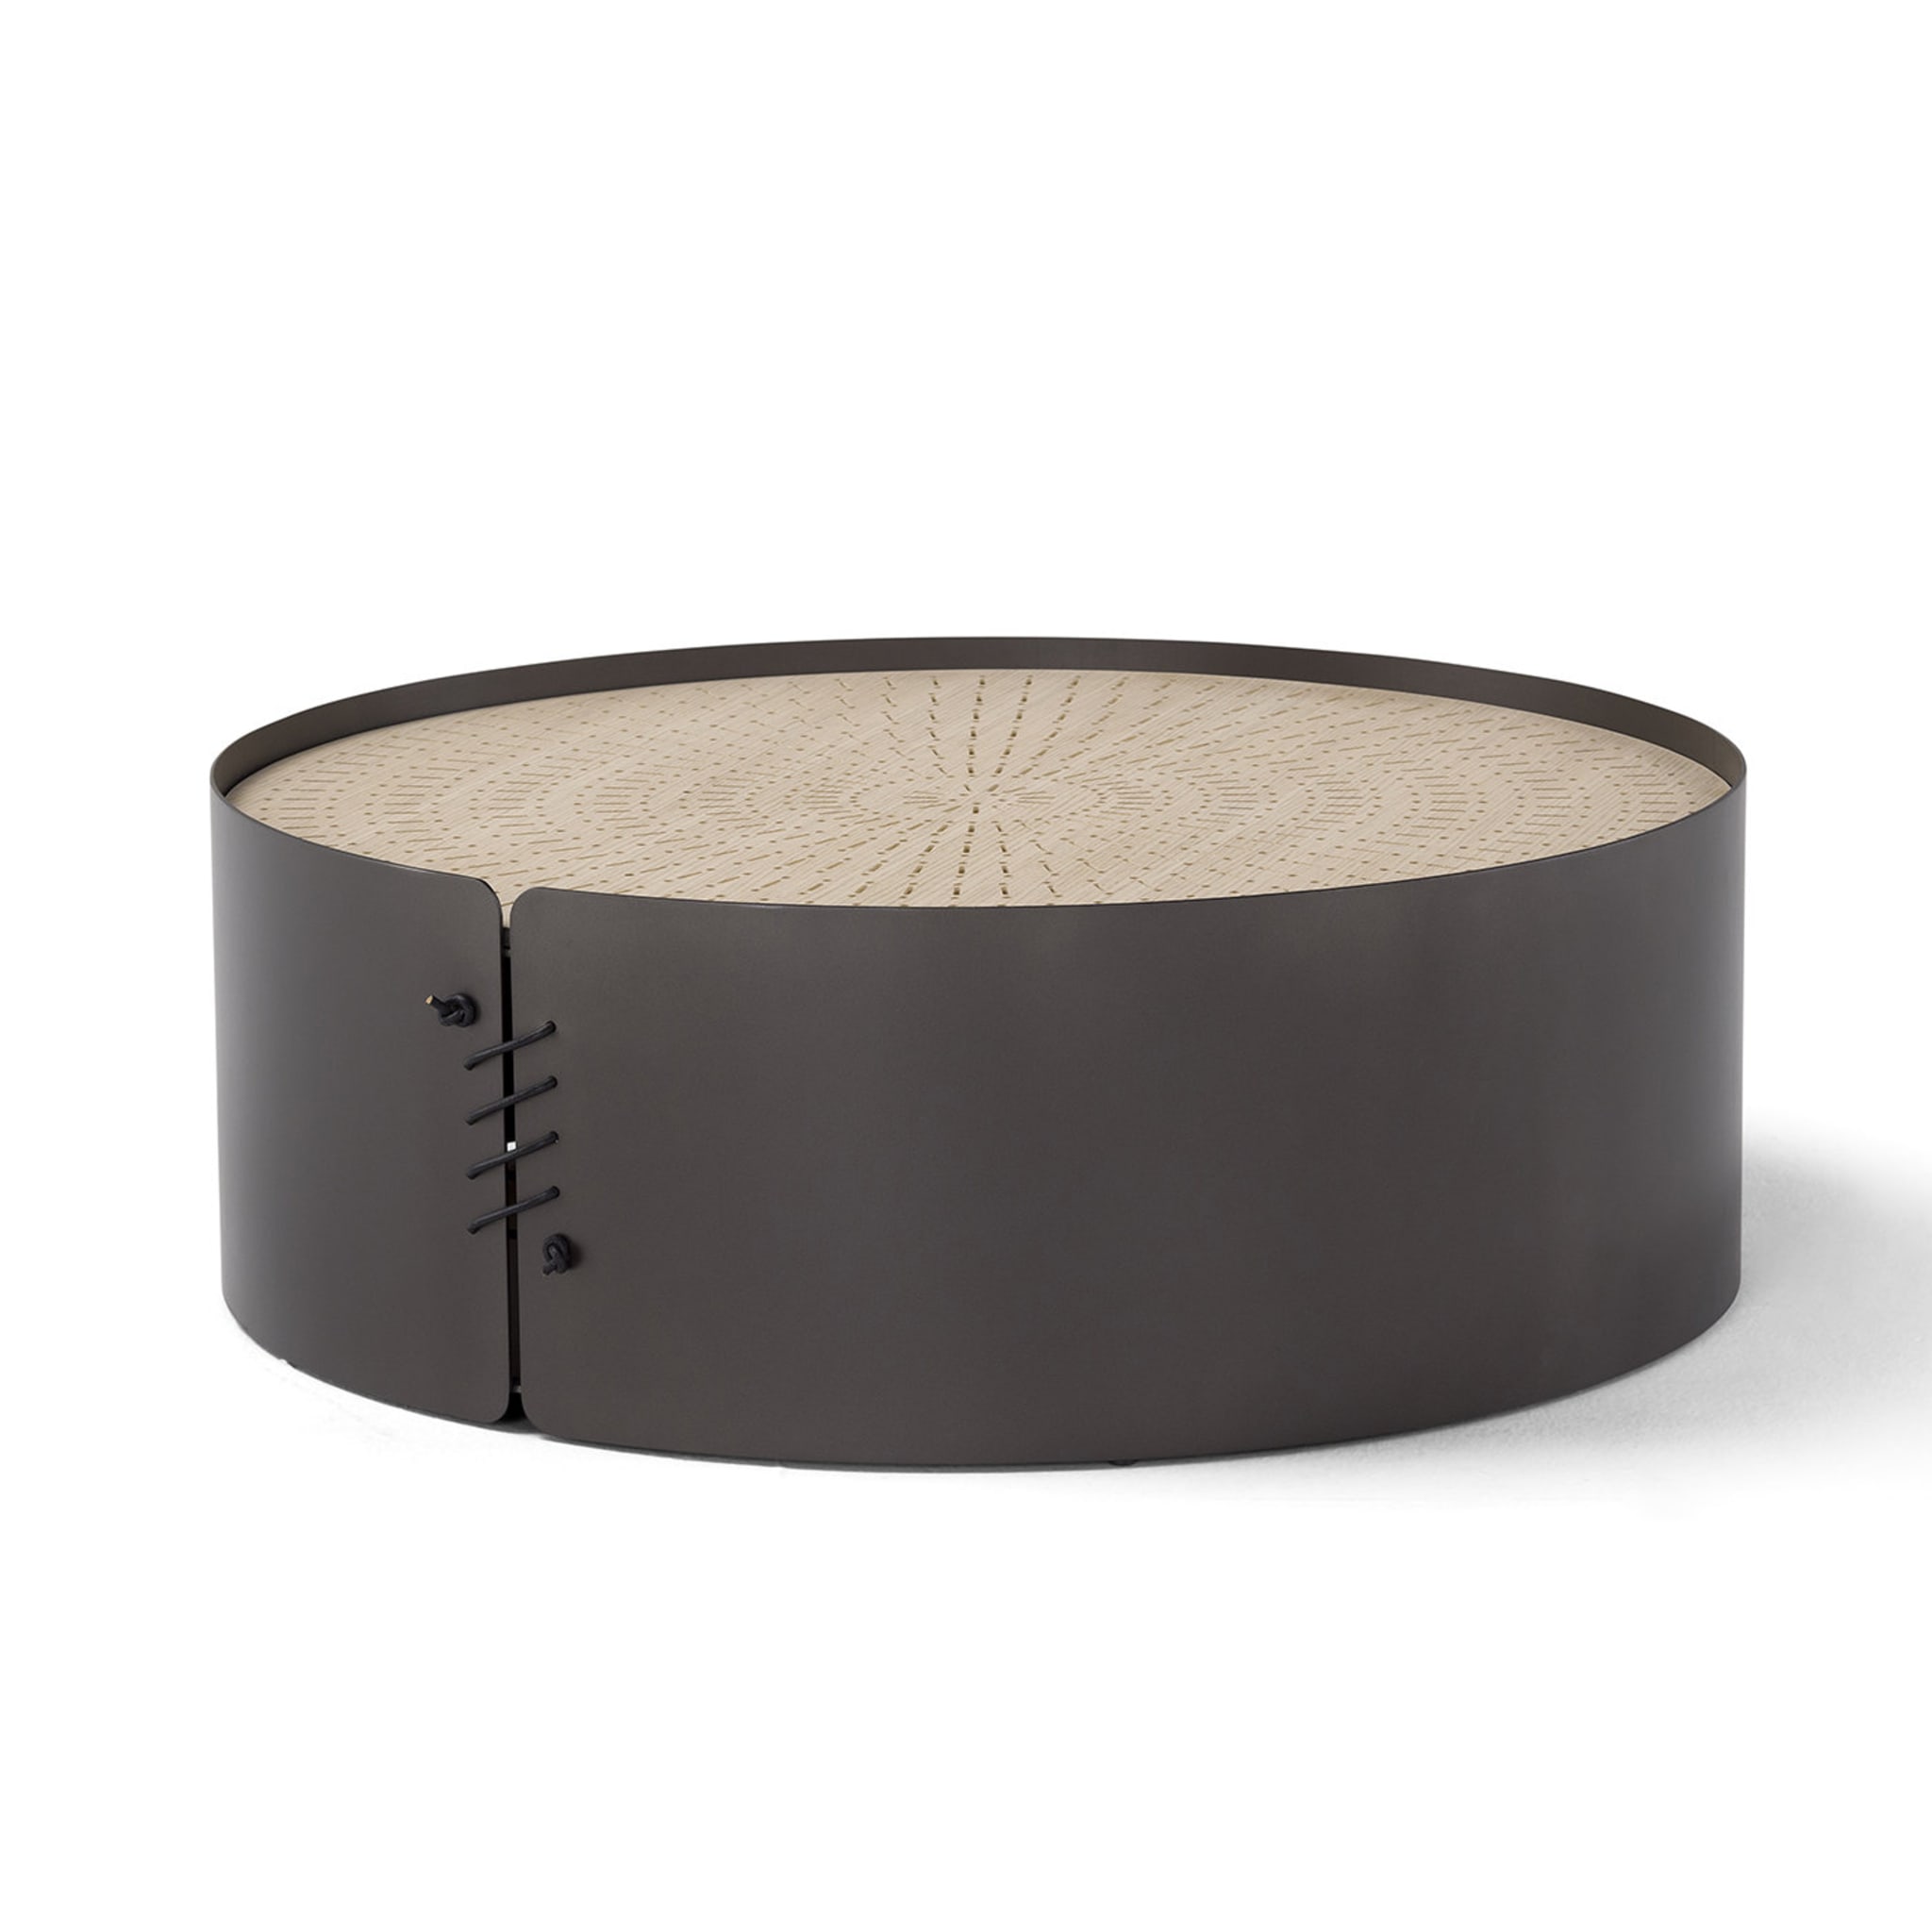 Setacci Natural Oak Coffee Table By Anton Cristell and Emanuel Gargano - Alternative view 1